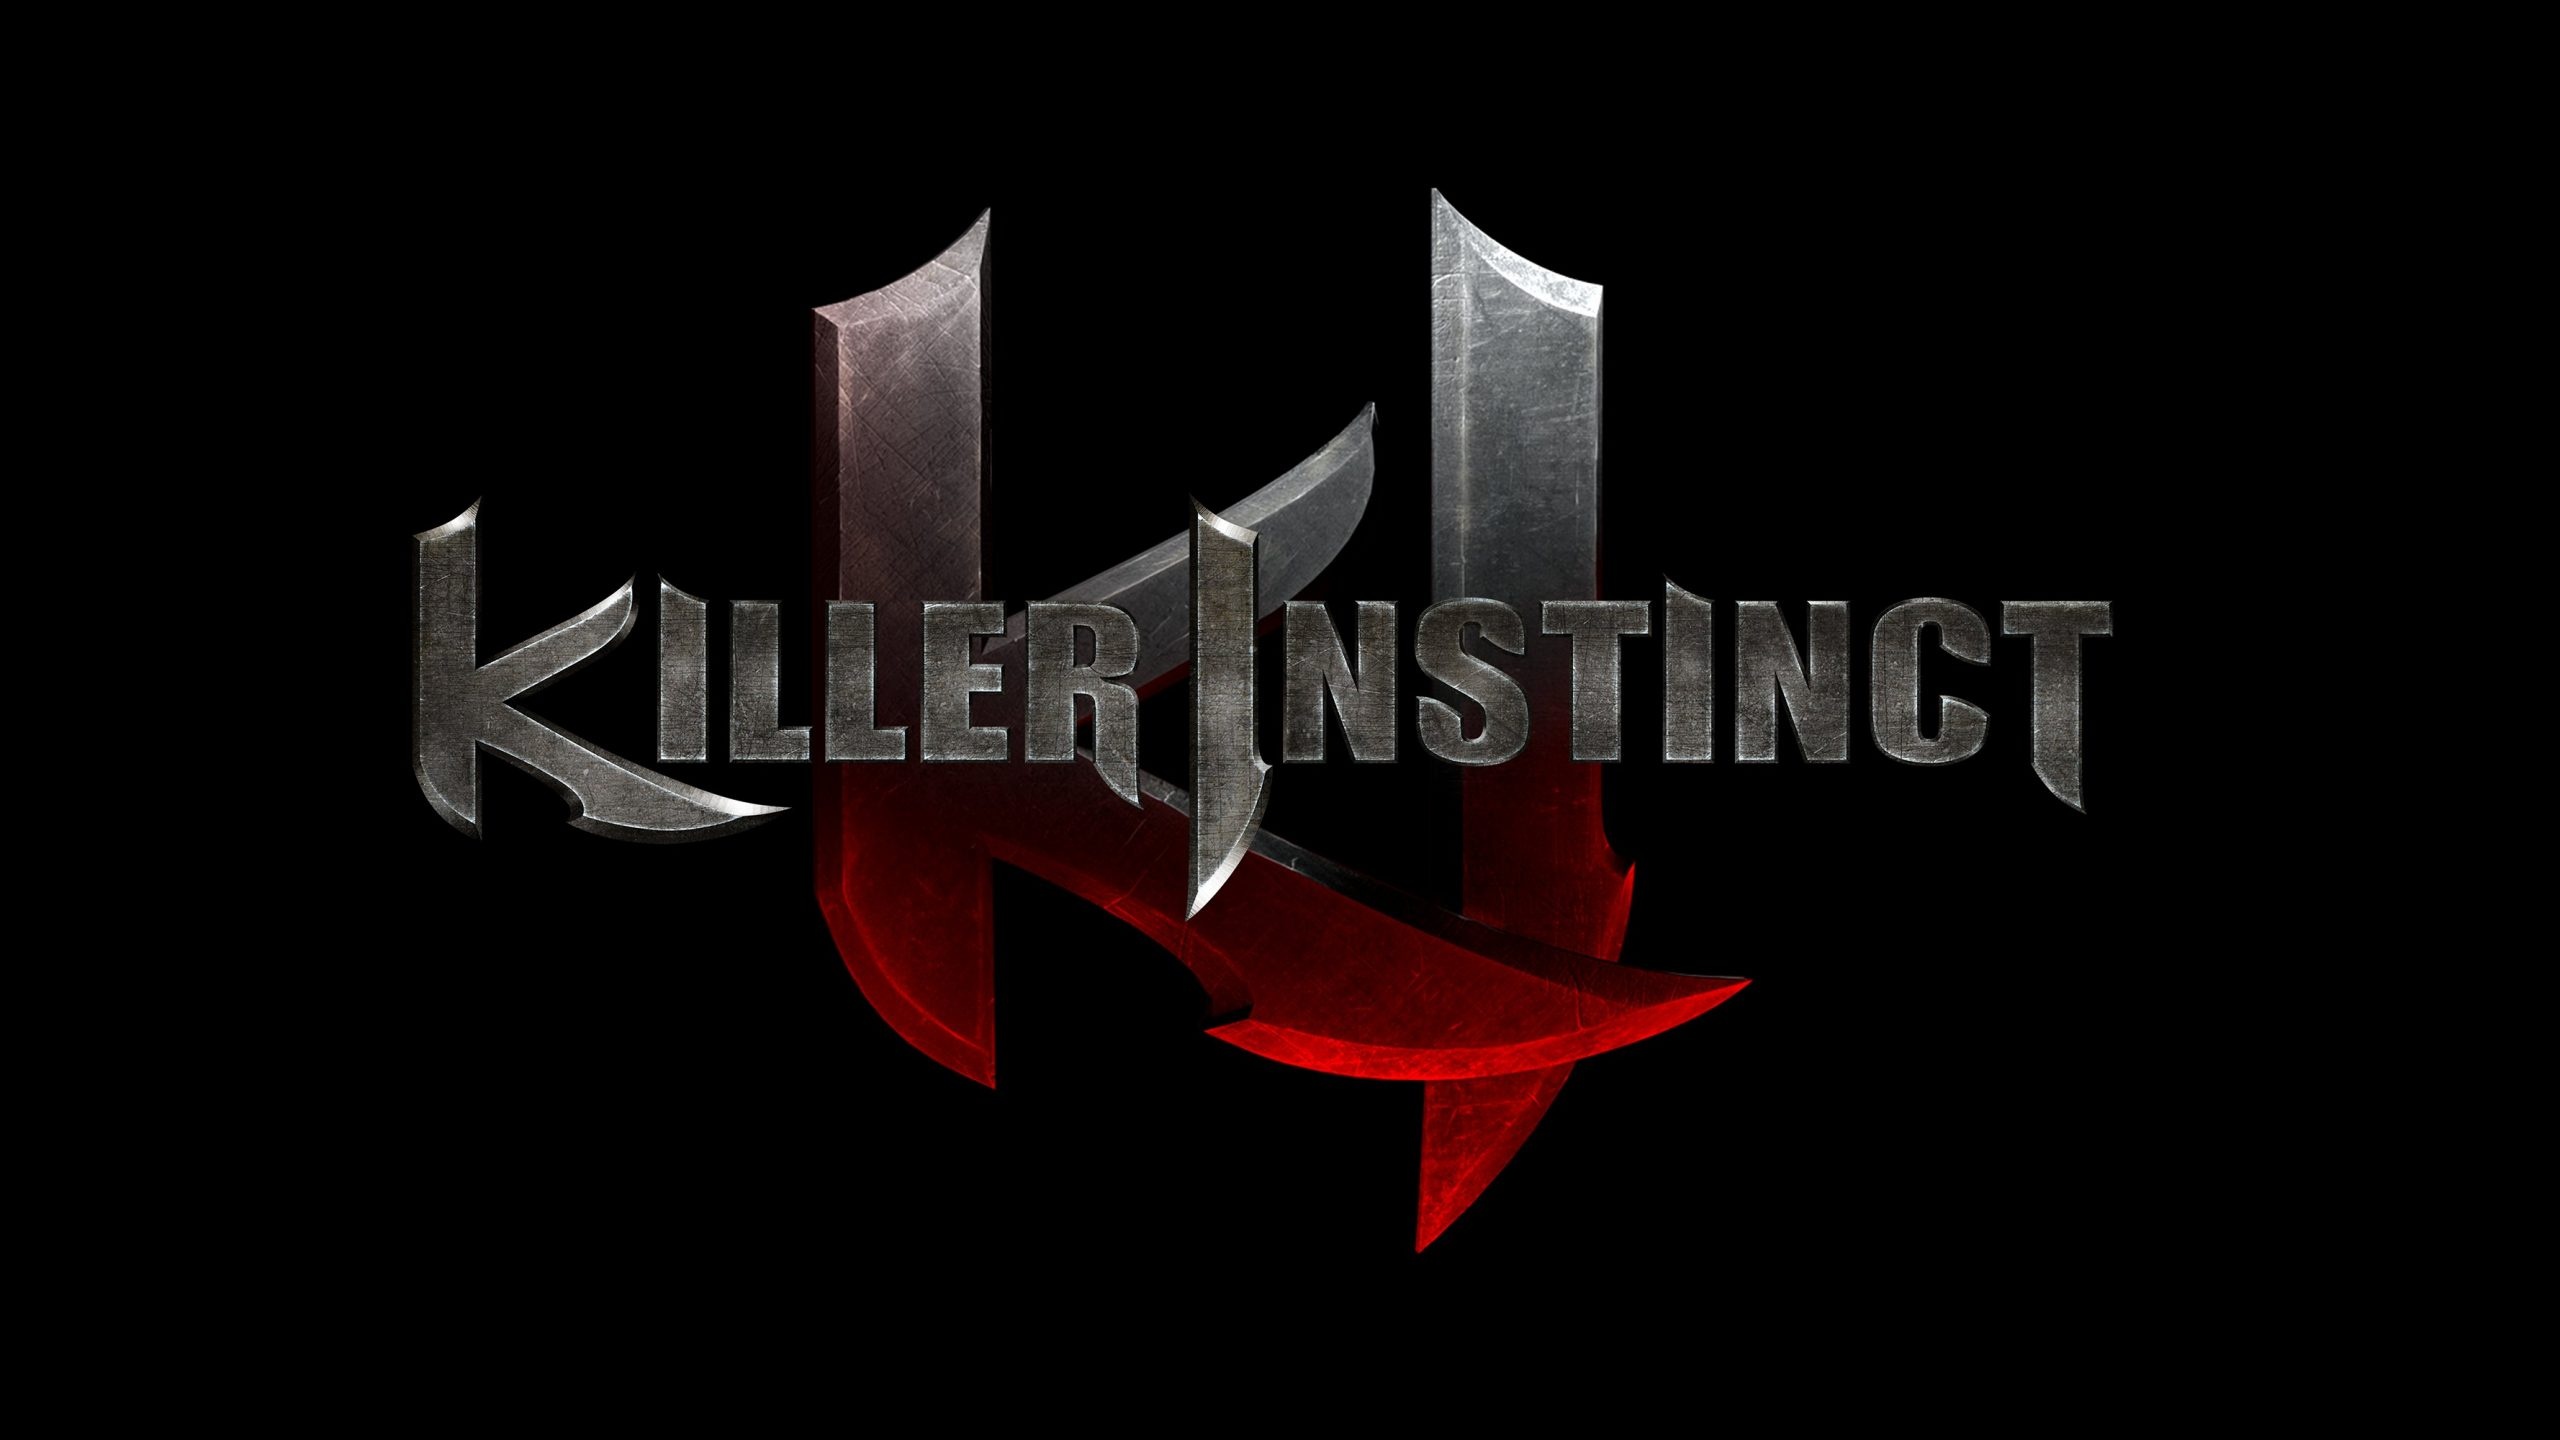 Killer Instinct, Phil Spencer's hint, Exciting announcement, Gaming community speculates, 2560x1440 HD Desktop